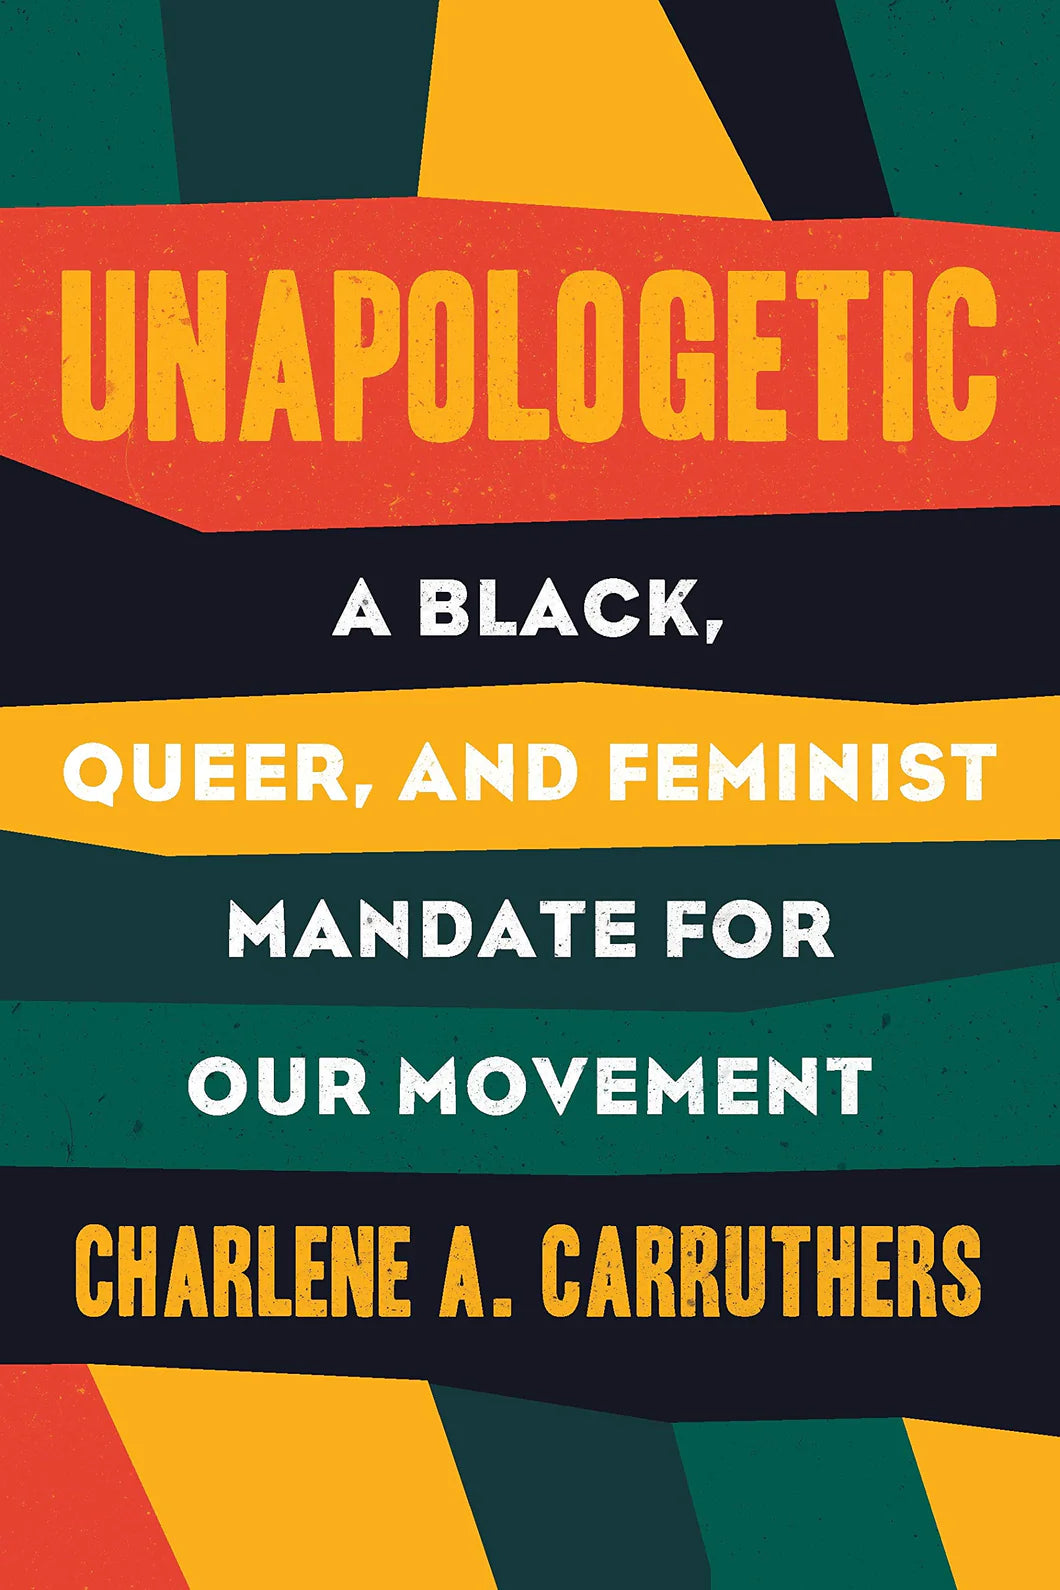 Unapologetic: A Black, Queer, and Feminist Mandate for Radical Movements (Paperback)